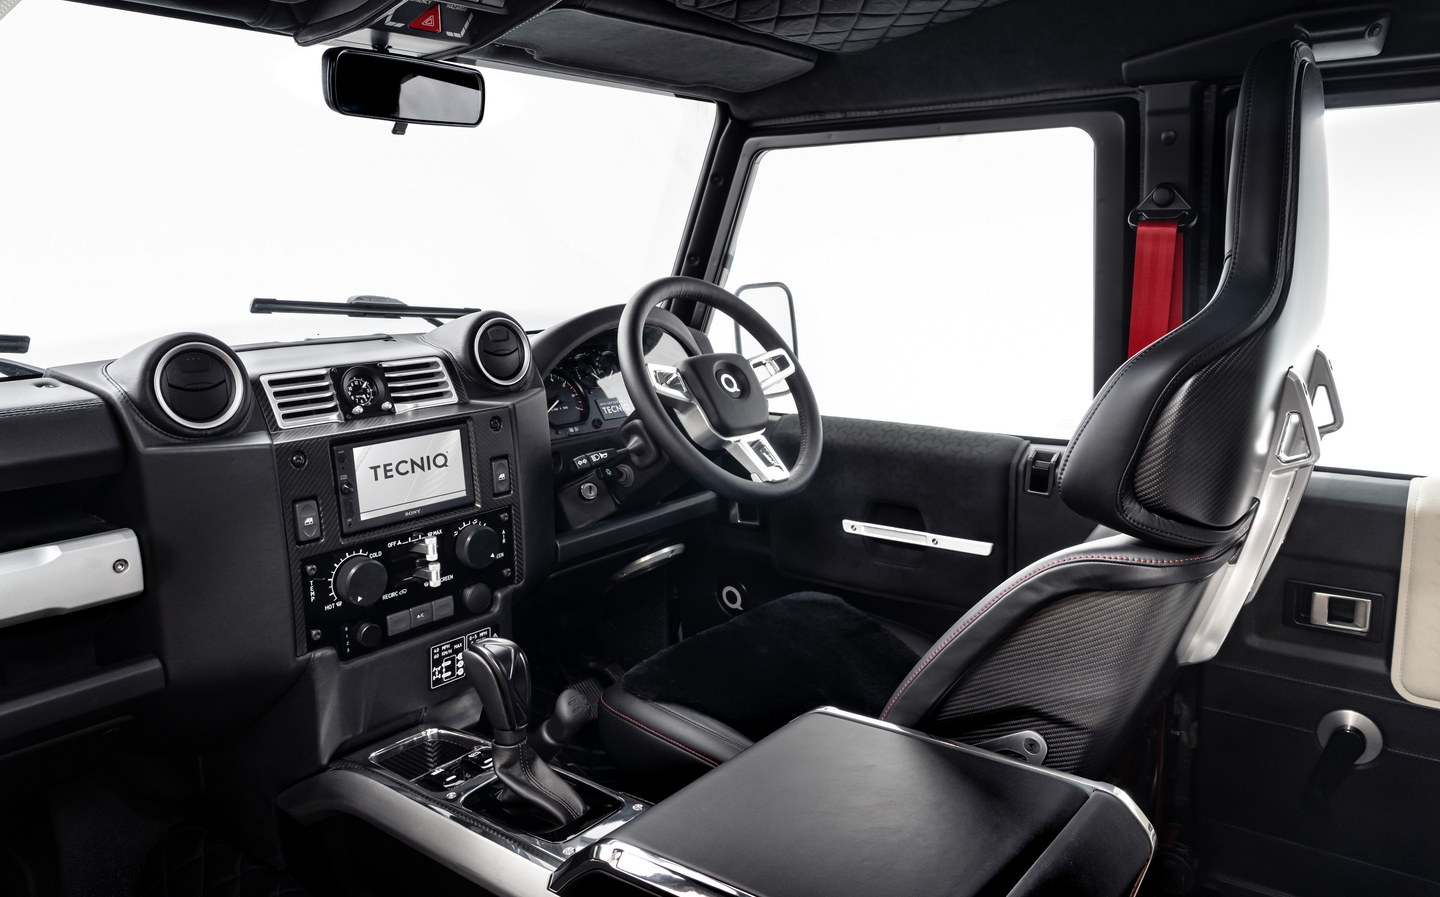 Chinook-inspired Land Rover Defender could fetch £180,000 at